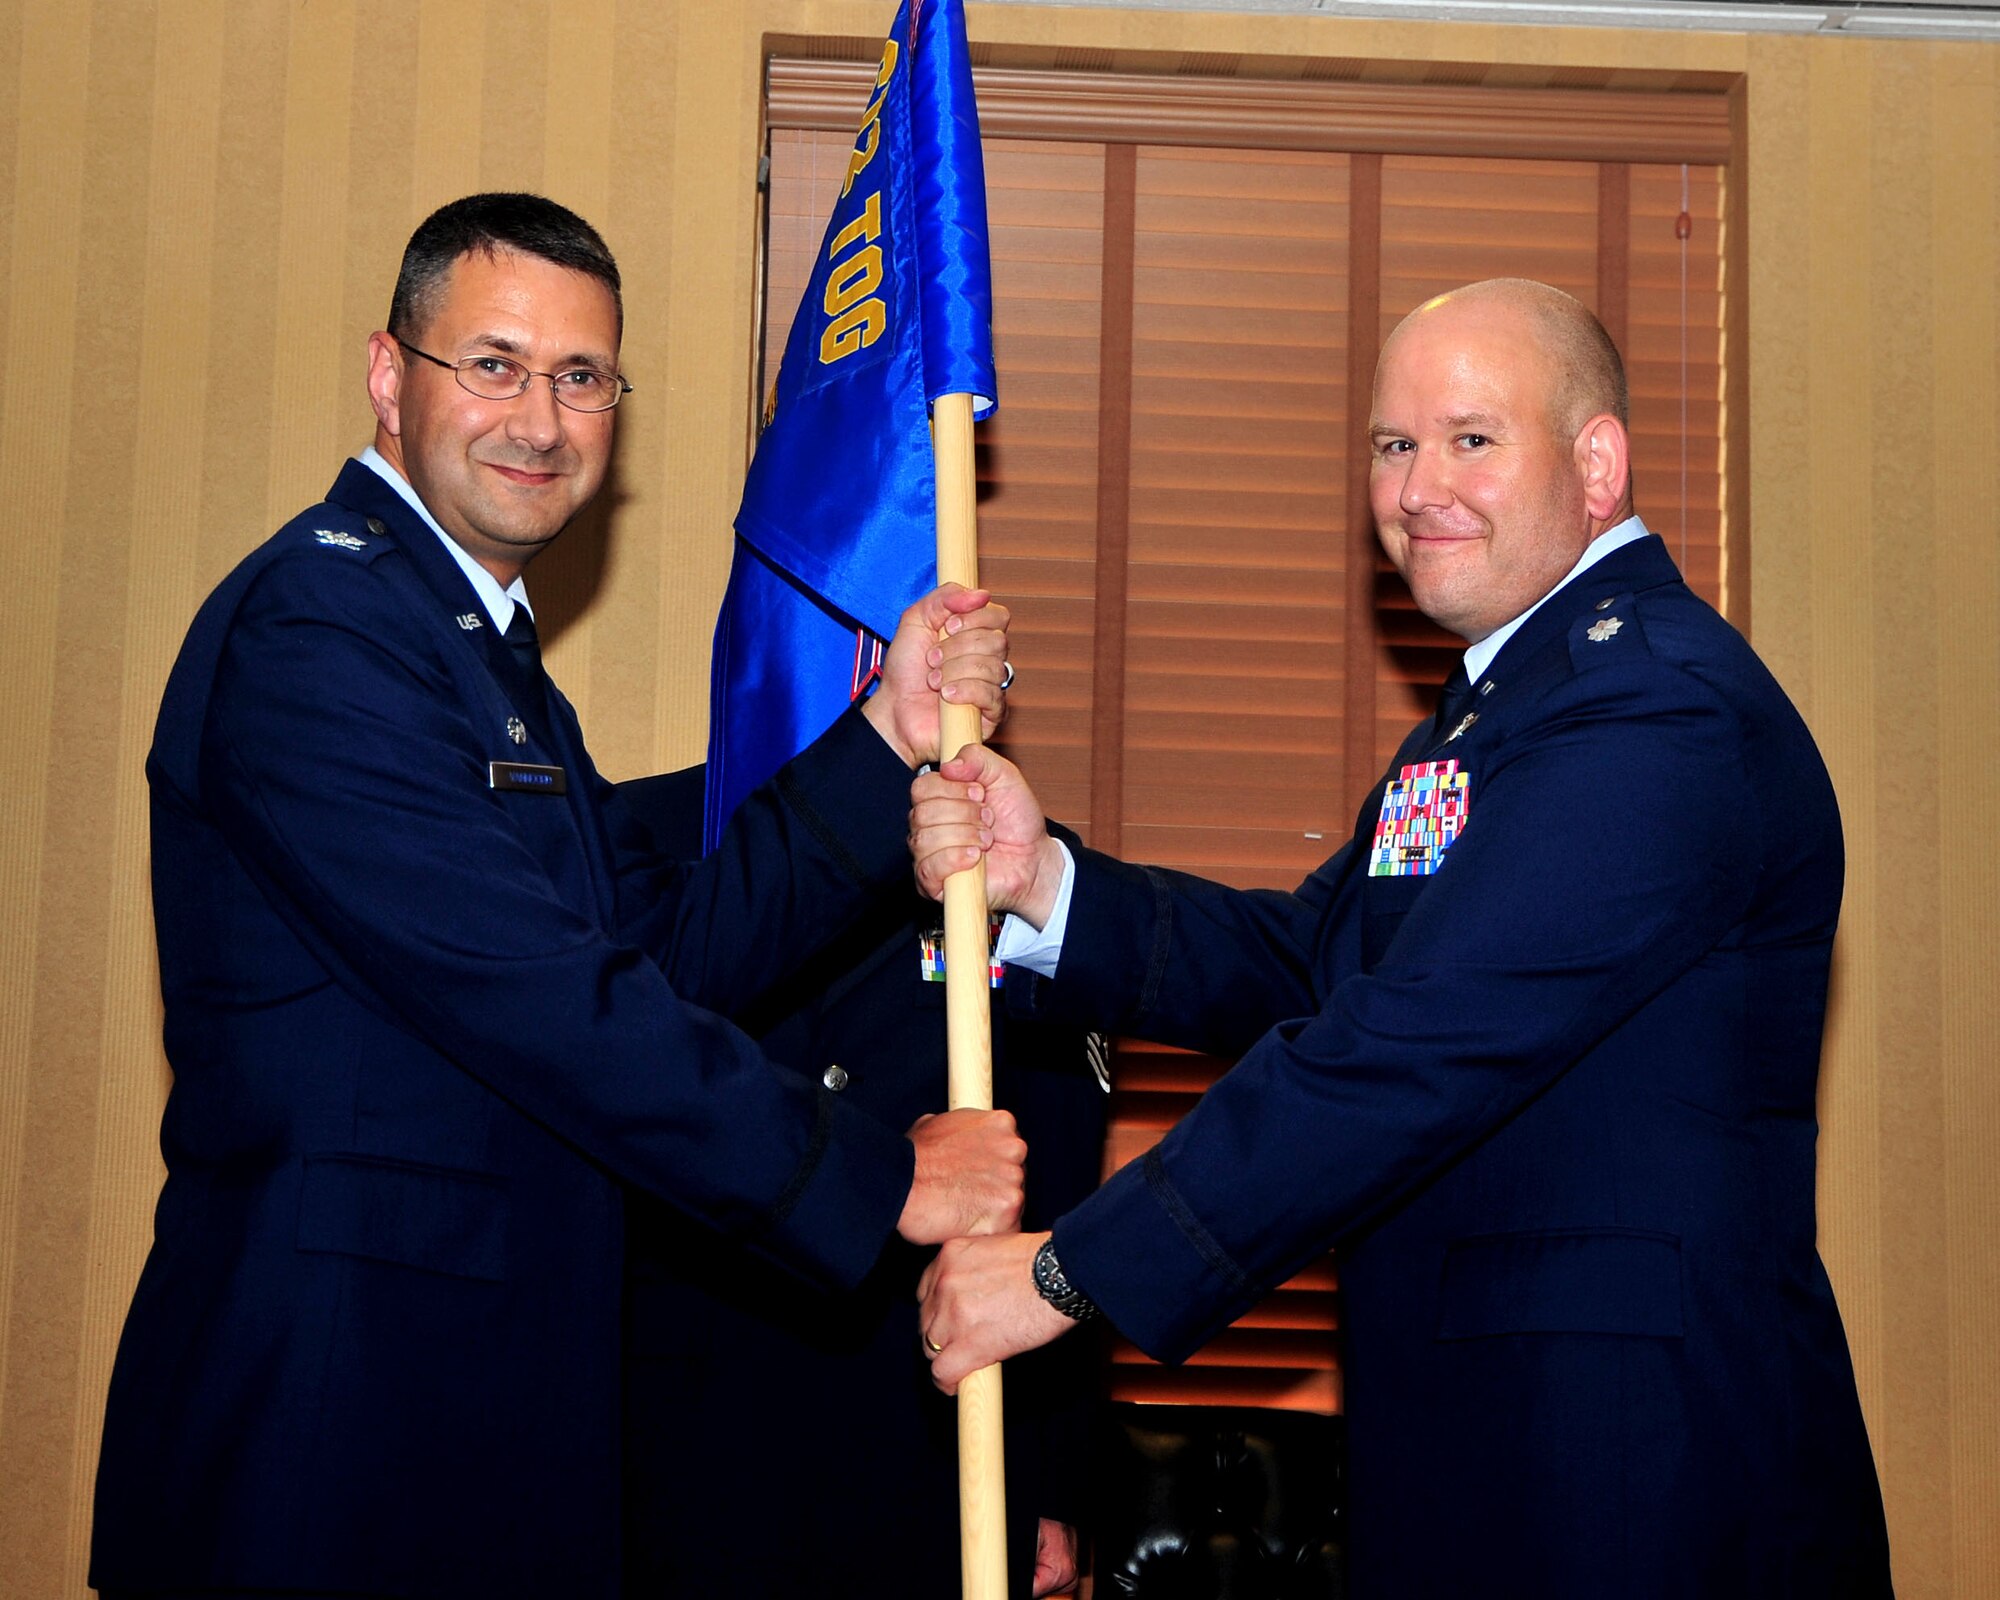 Col. Jonathan VanNoord, 612th Theater Operations Group commander, passes the 612th Support Squadron guidon to Lt. Col. Jeremy Thiel, incoming 612th Support Squadron commander, during a change-of-command ceremony on Davis-Monthan AFB, Ariz., July 16. (USAF photo by 355th Fighter Wing Public Affairs/Released)